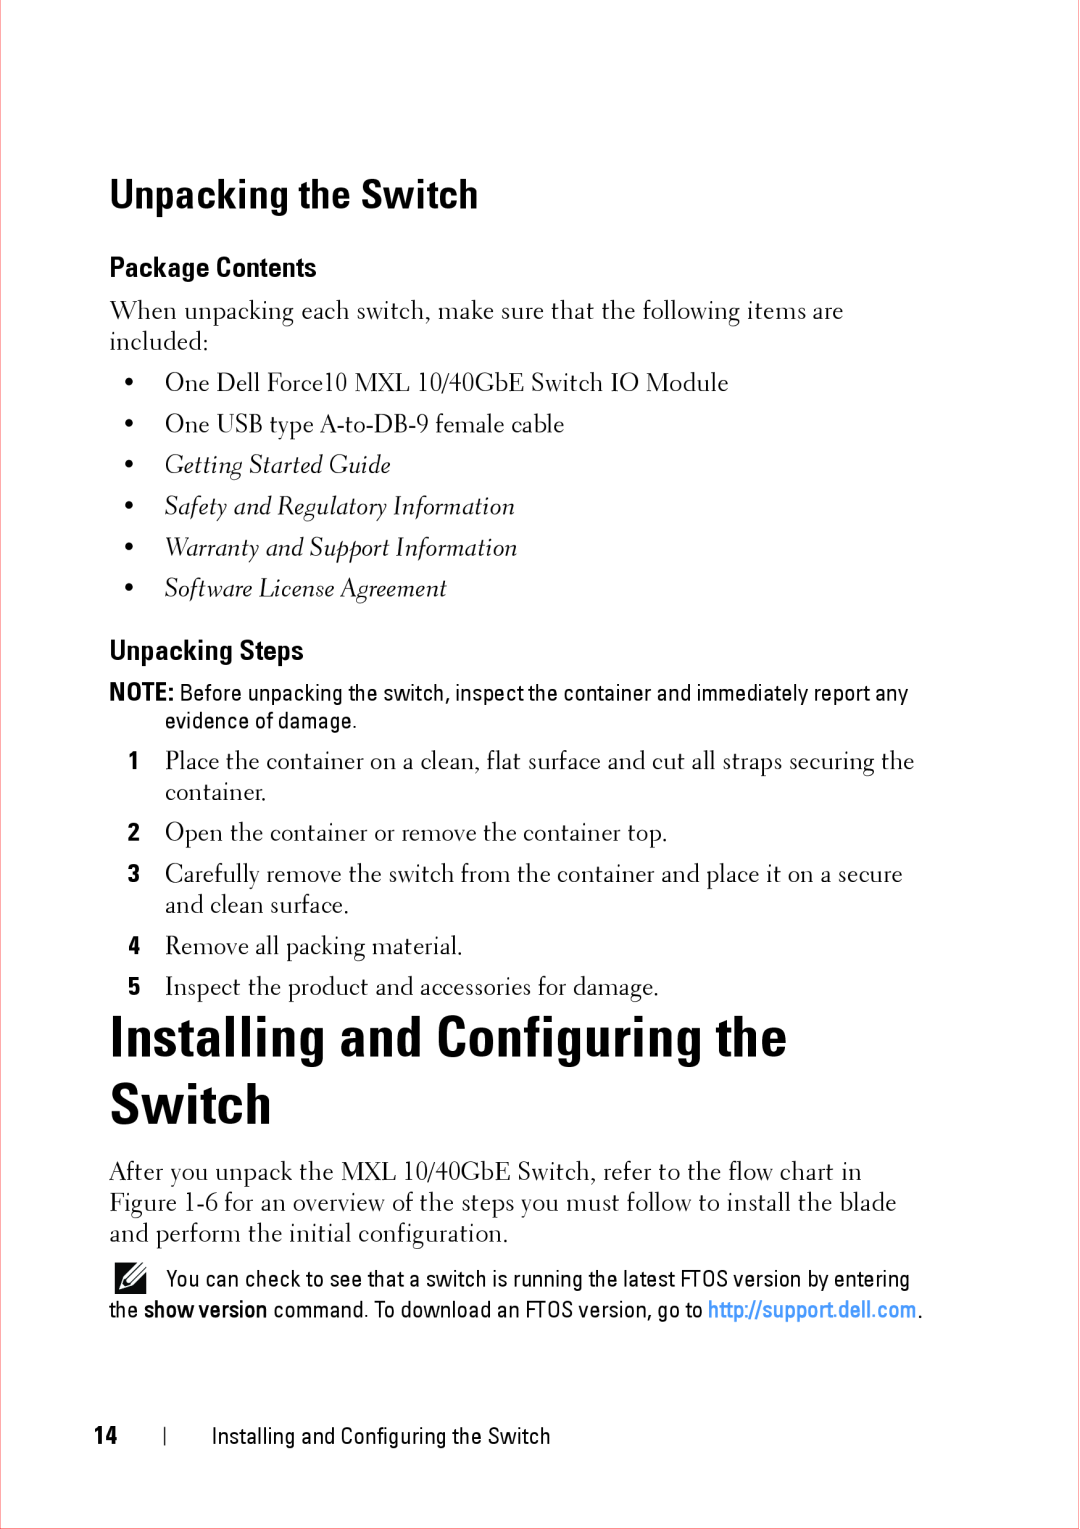 Force10 Networks CC-C-BLNK-LC manual Installing and Configuring the Switch, Unpacking the Switch, Package Contents 